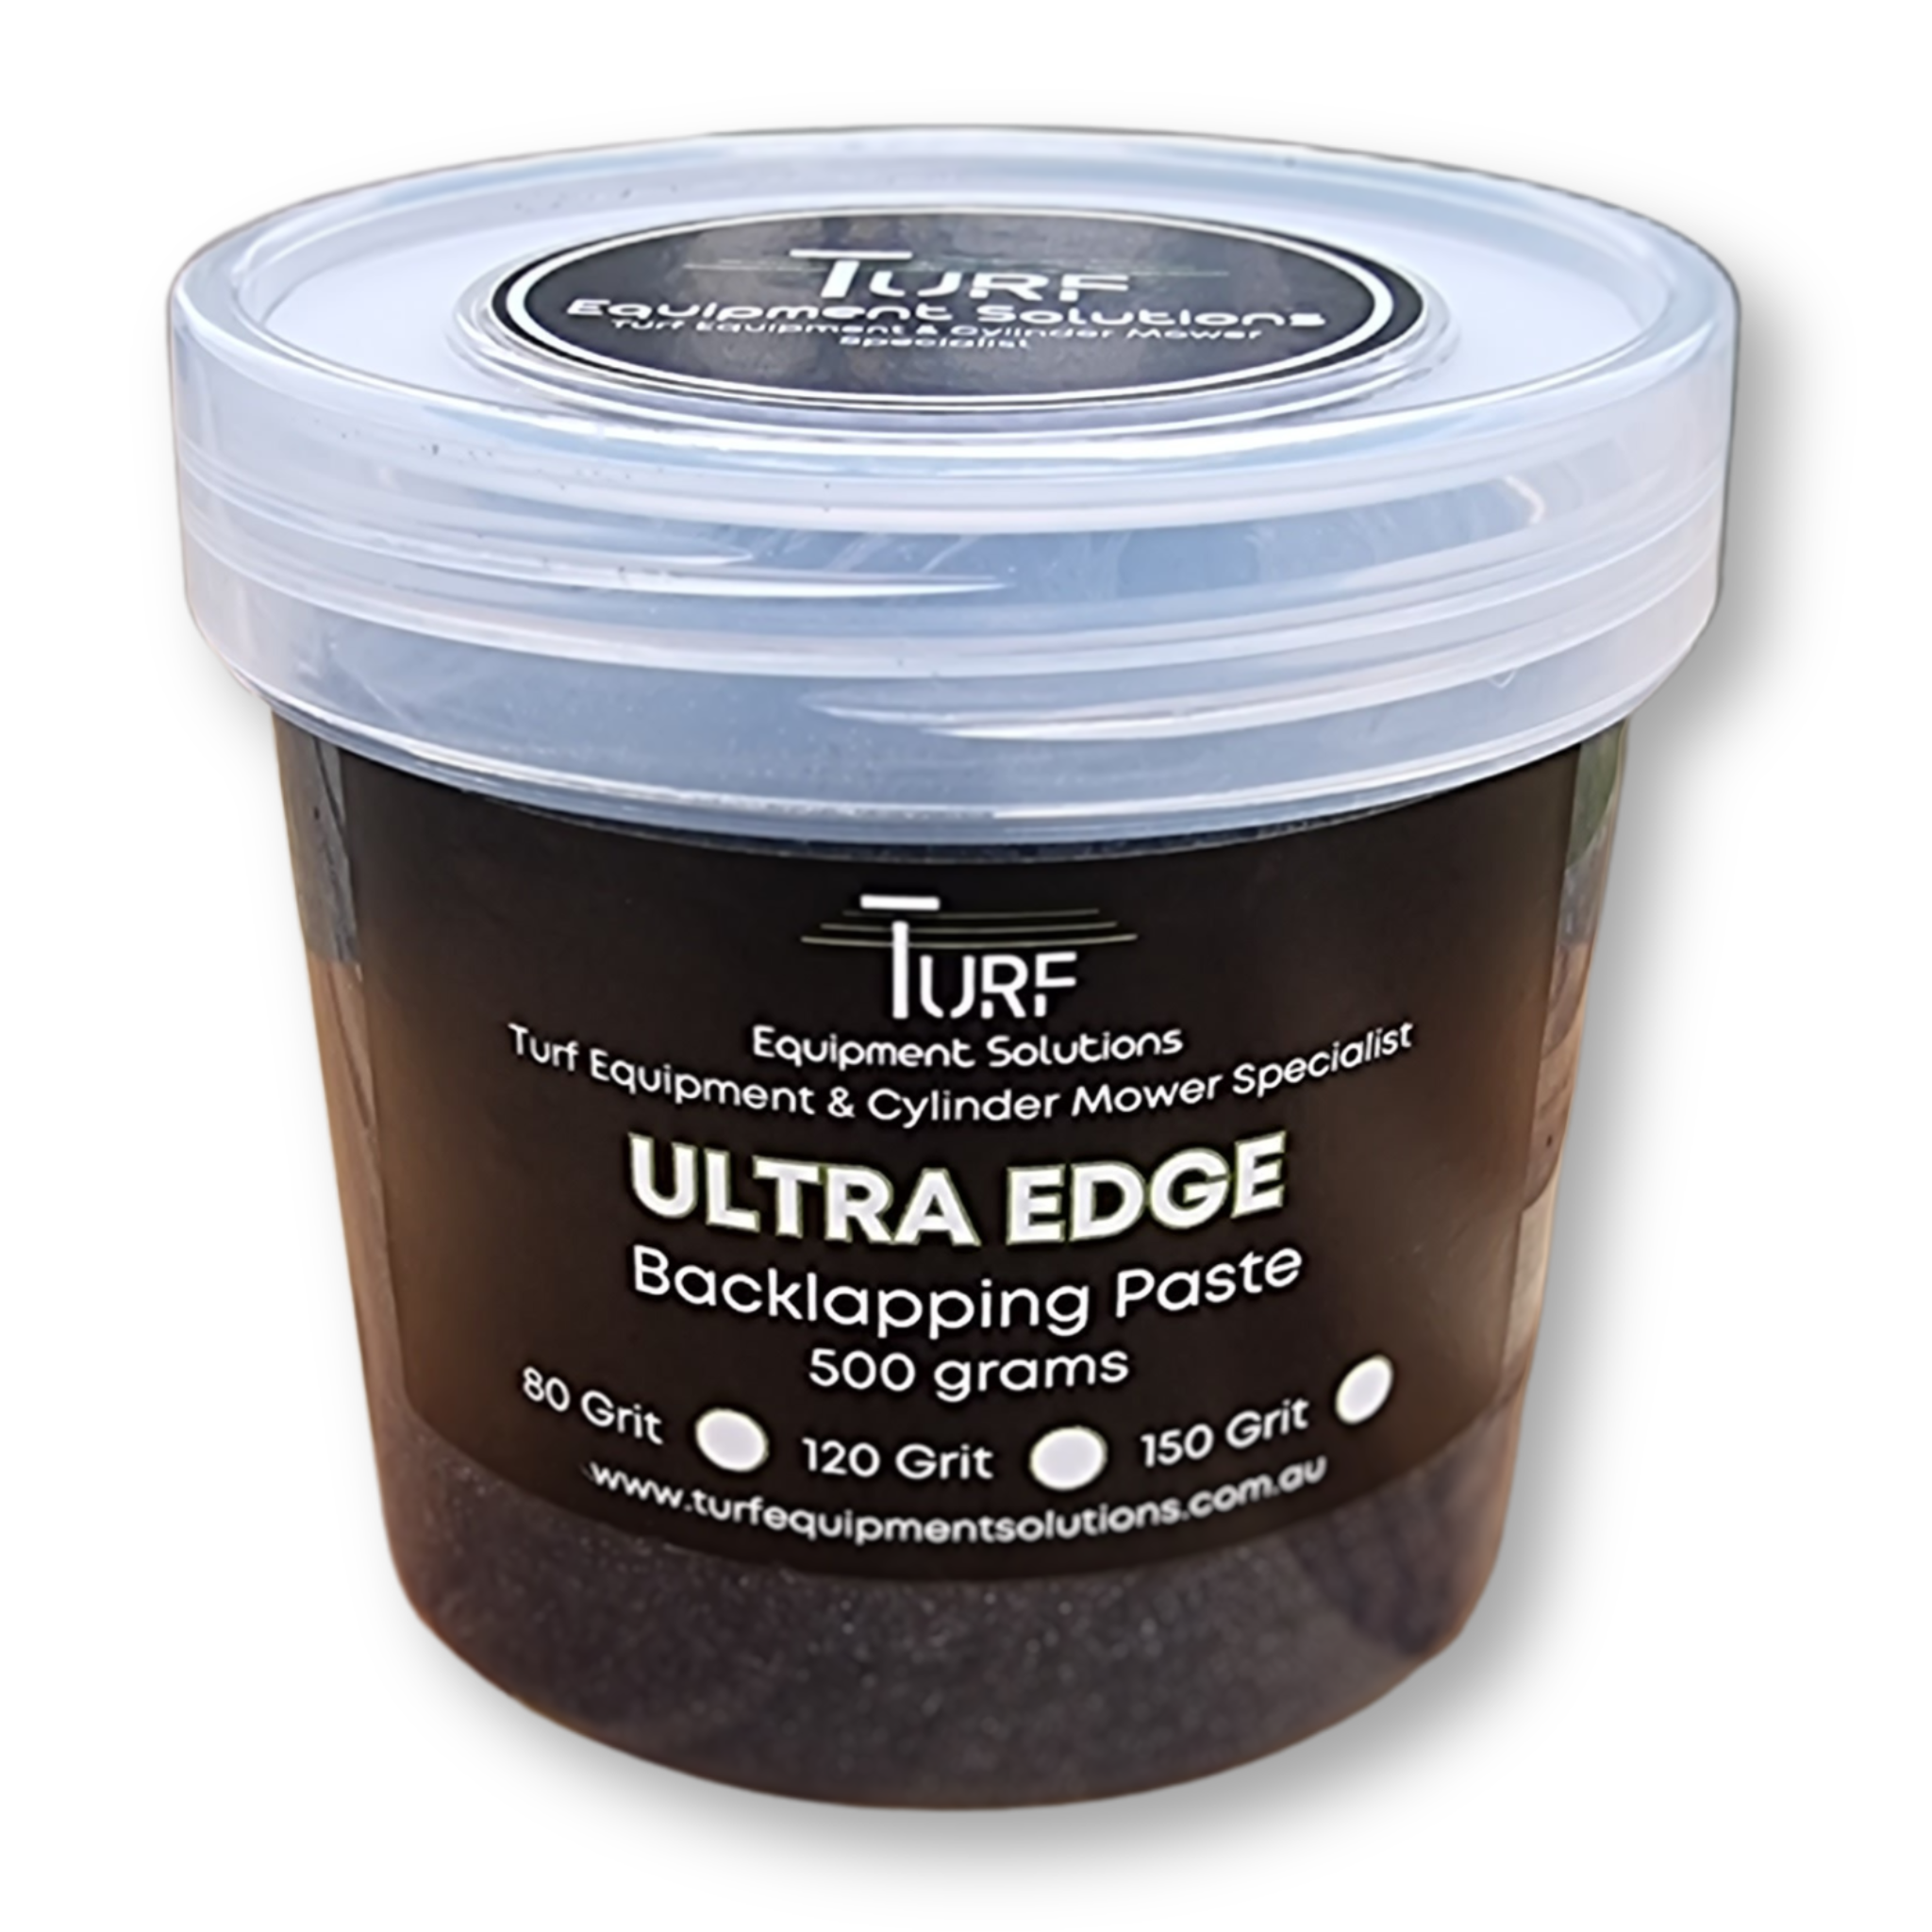 Ultra Edge Backlapping Paste